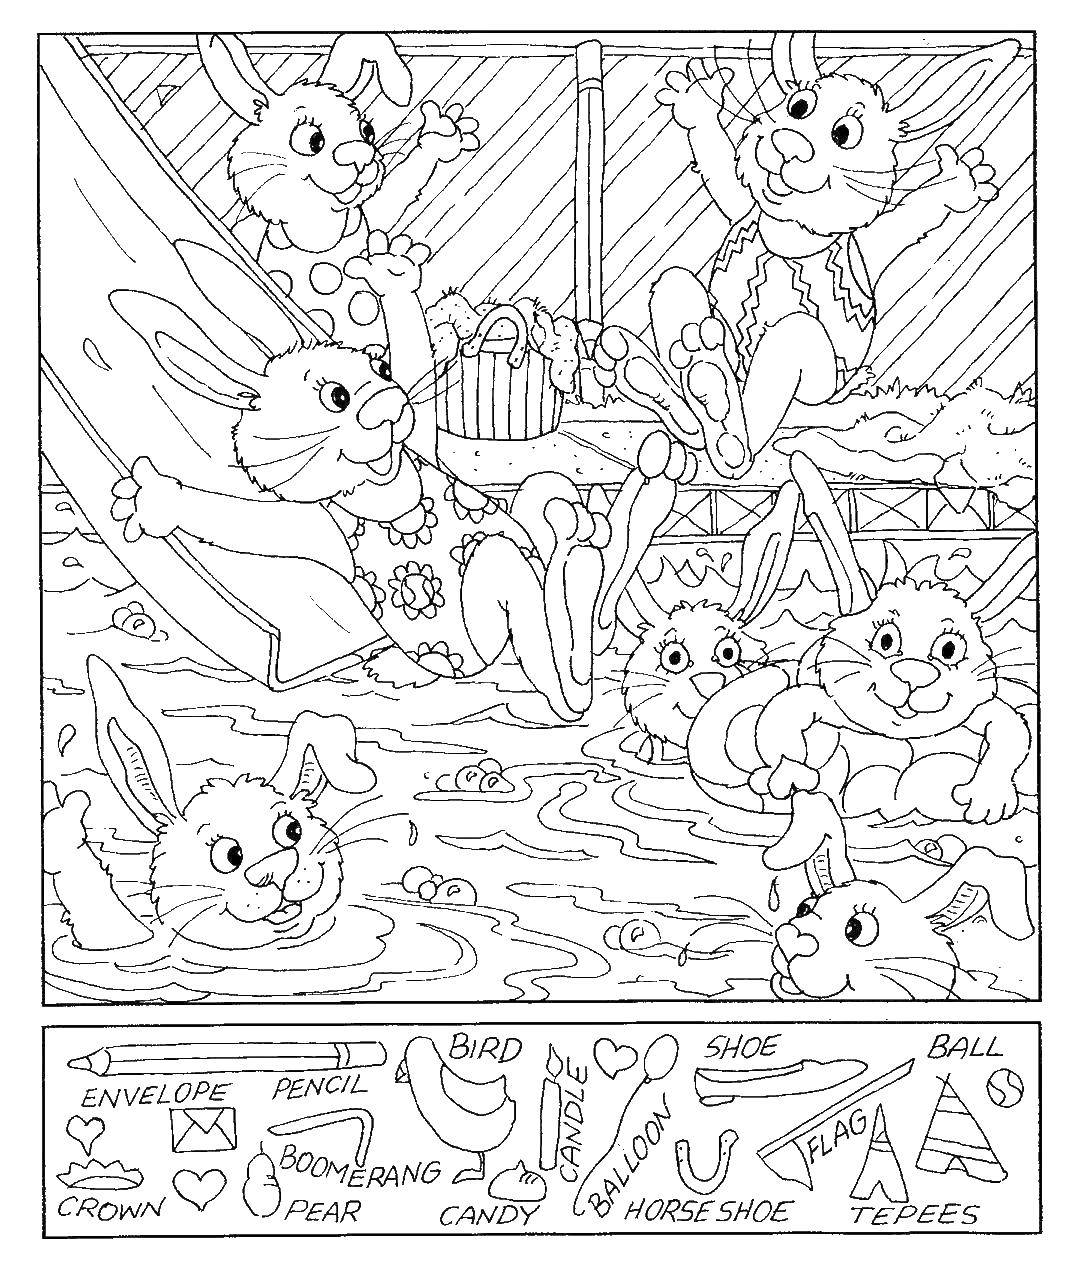 Online coloring pages coloring page bunnies on a picnic find hidden download print coloring page